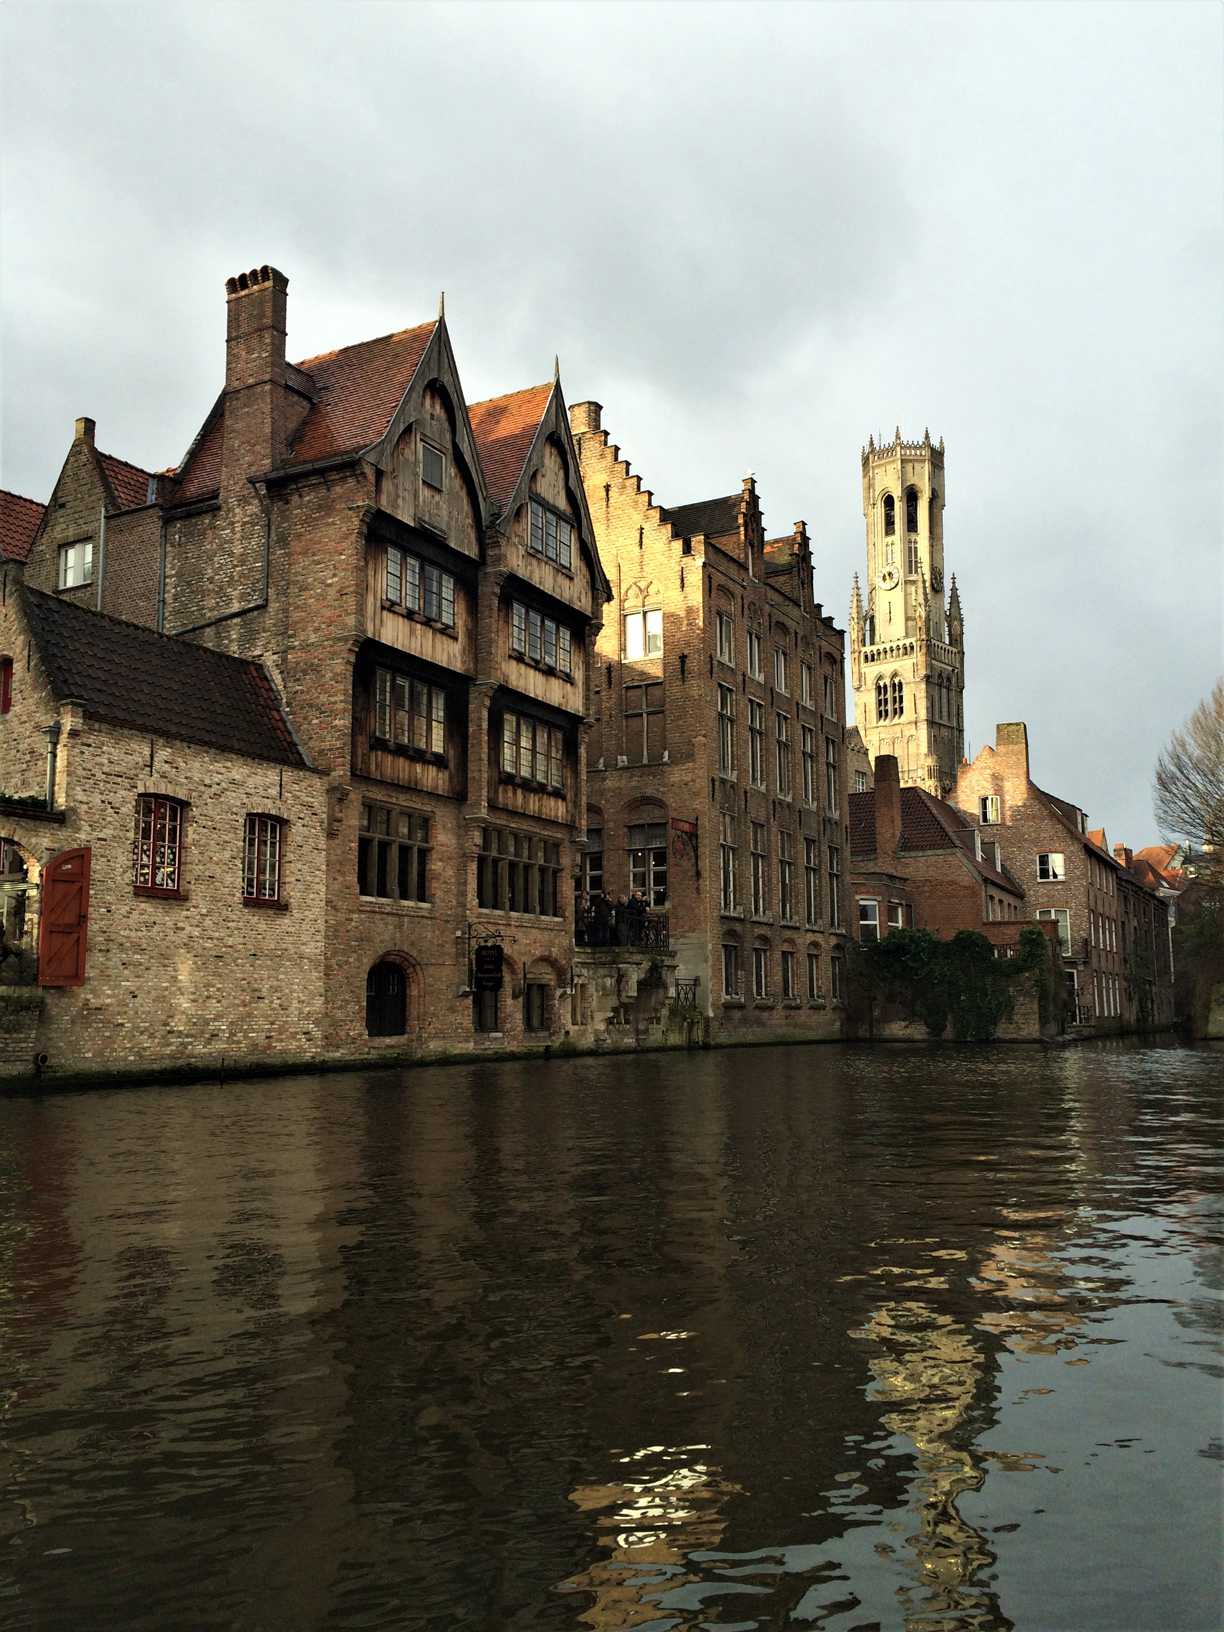 A picture of the oldest wooden buildings in Bruges, Belgium as seen from a boat on the canal.